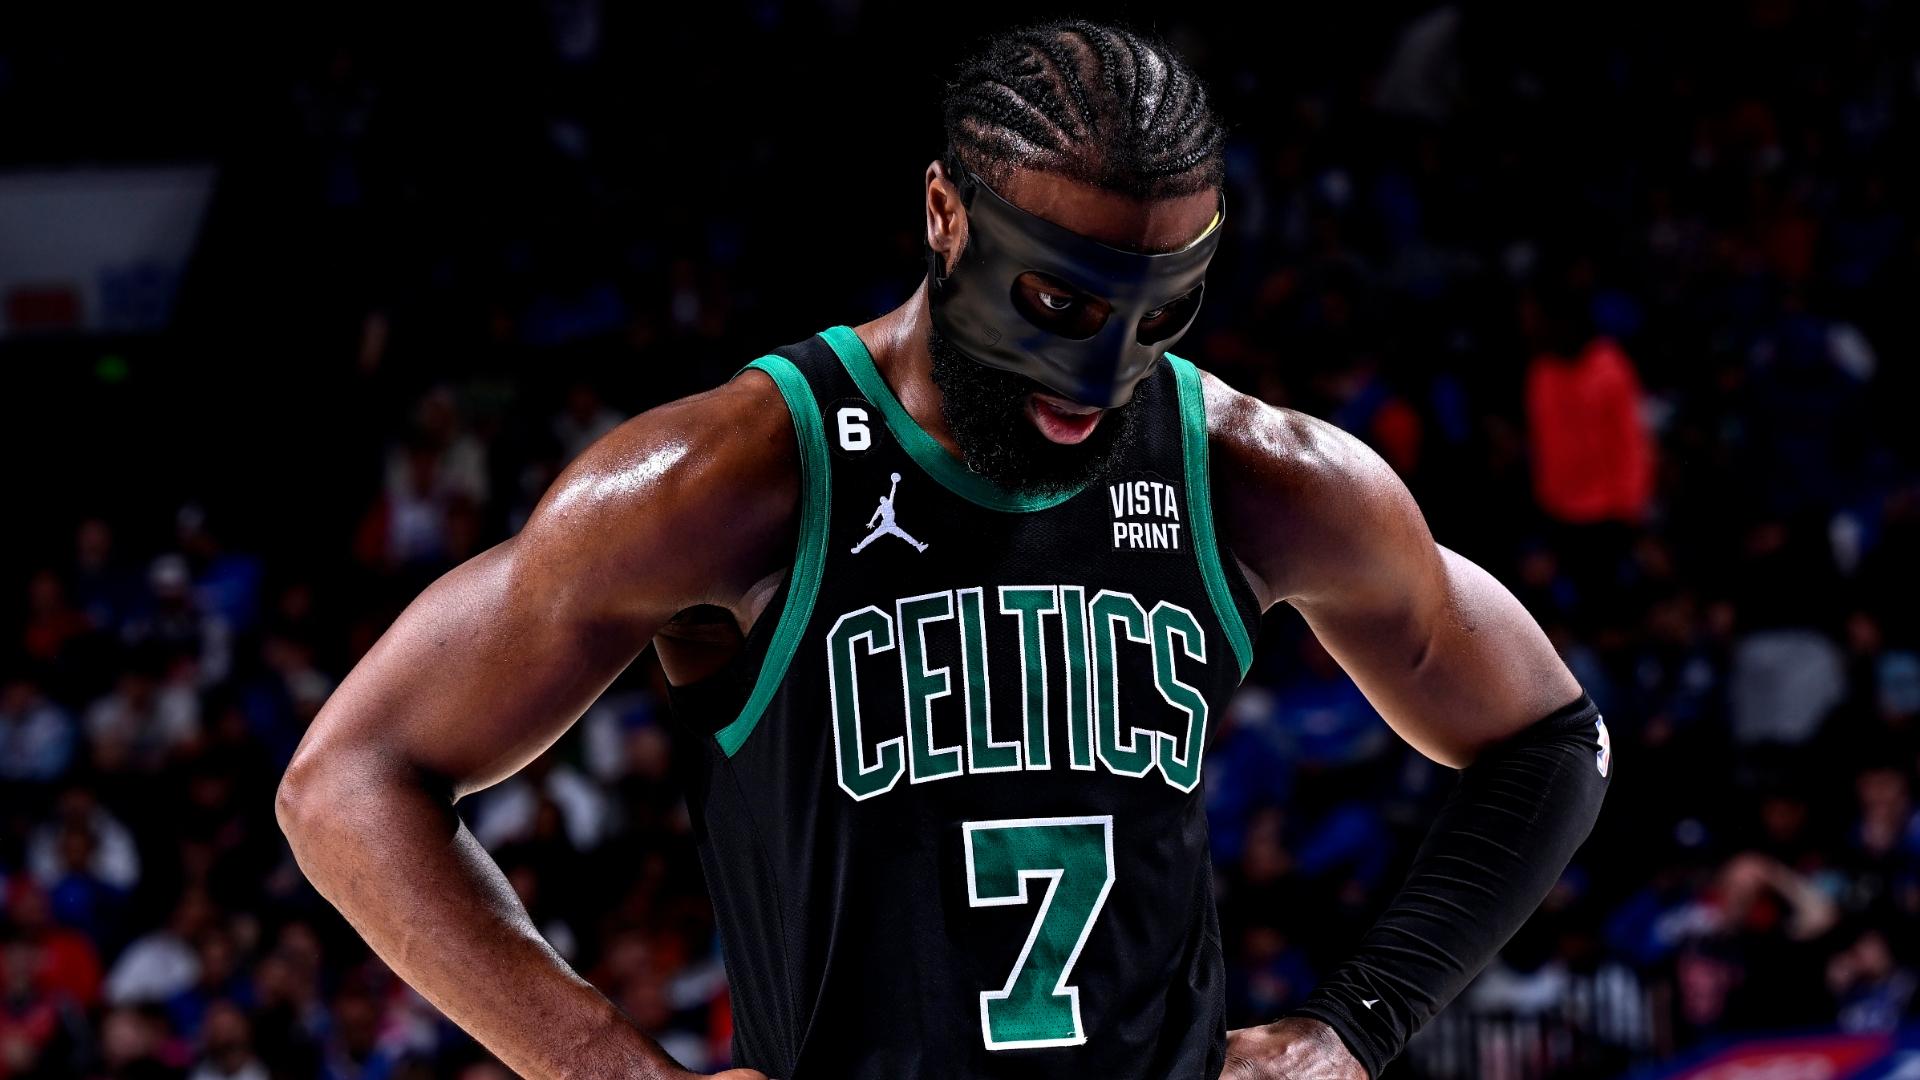 Why Does Jaylen Brown Wear a Mask